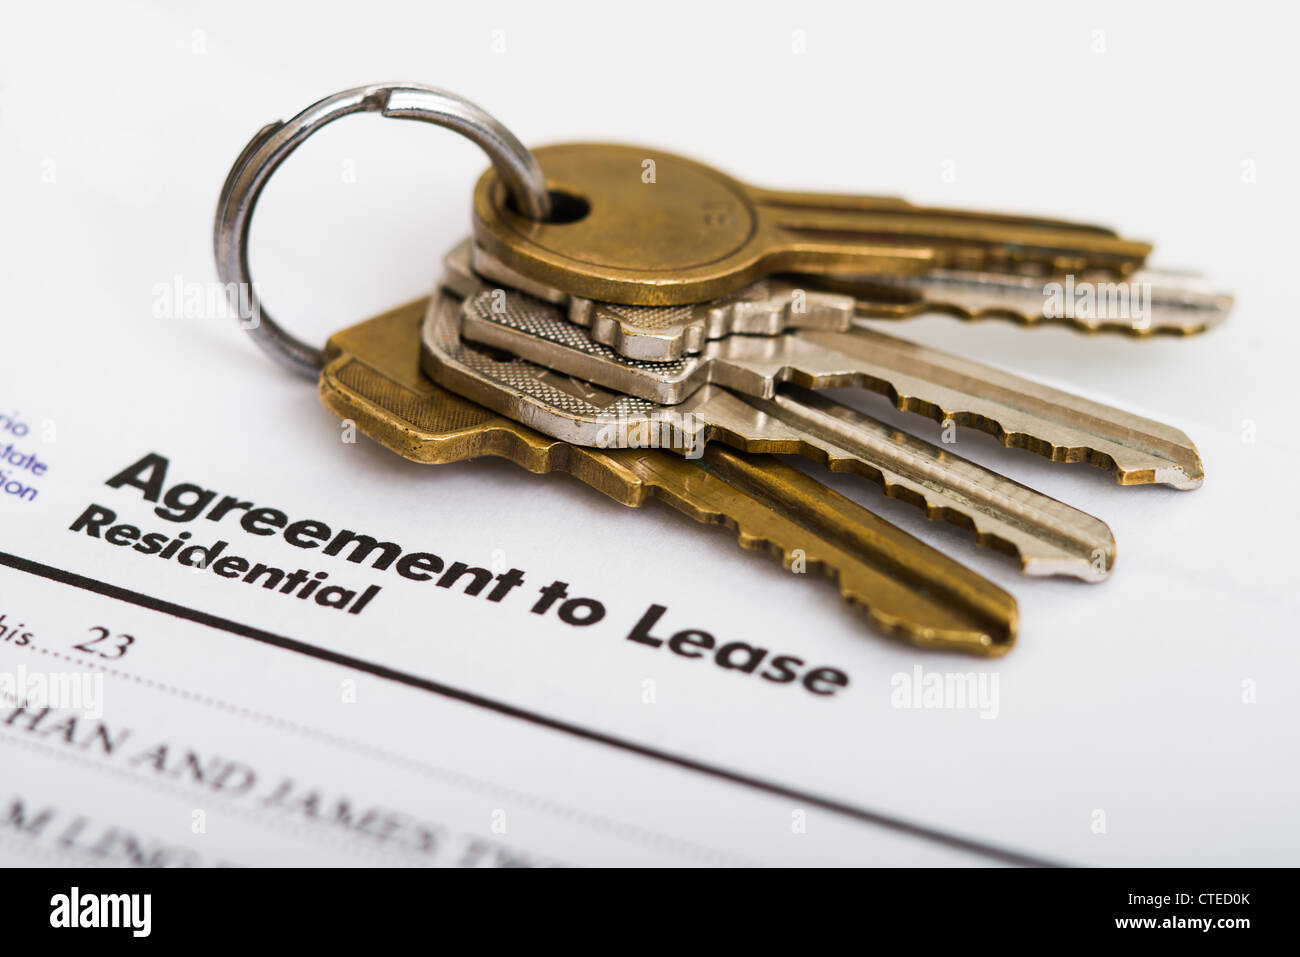 Keys and a lease agreement Stock Photo